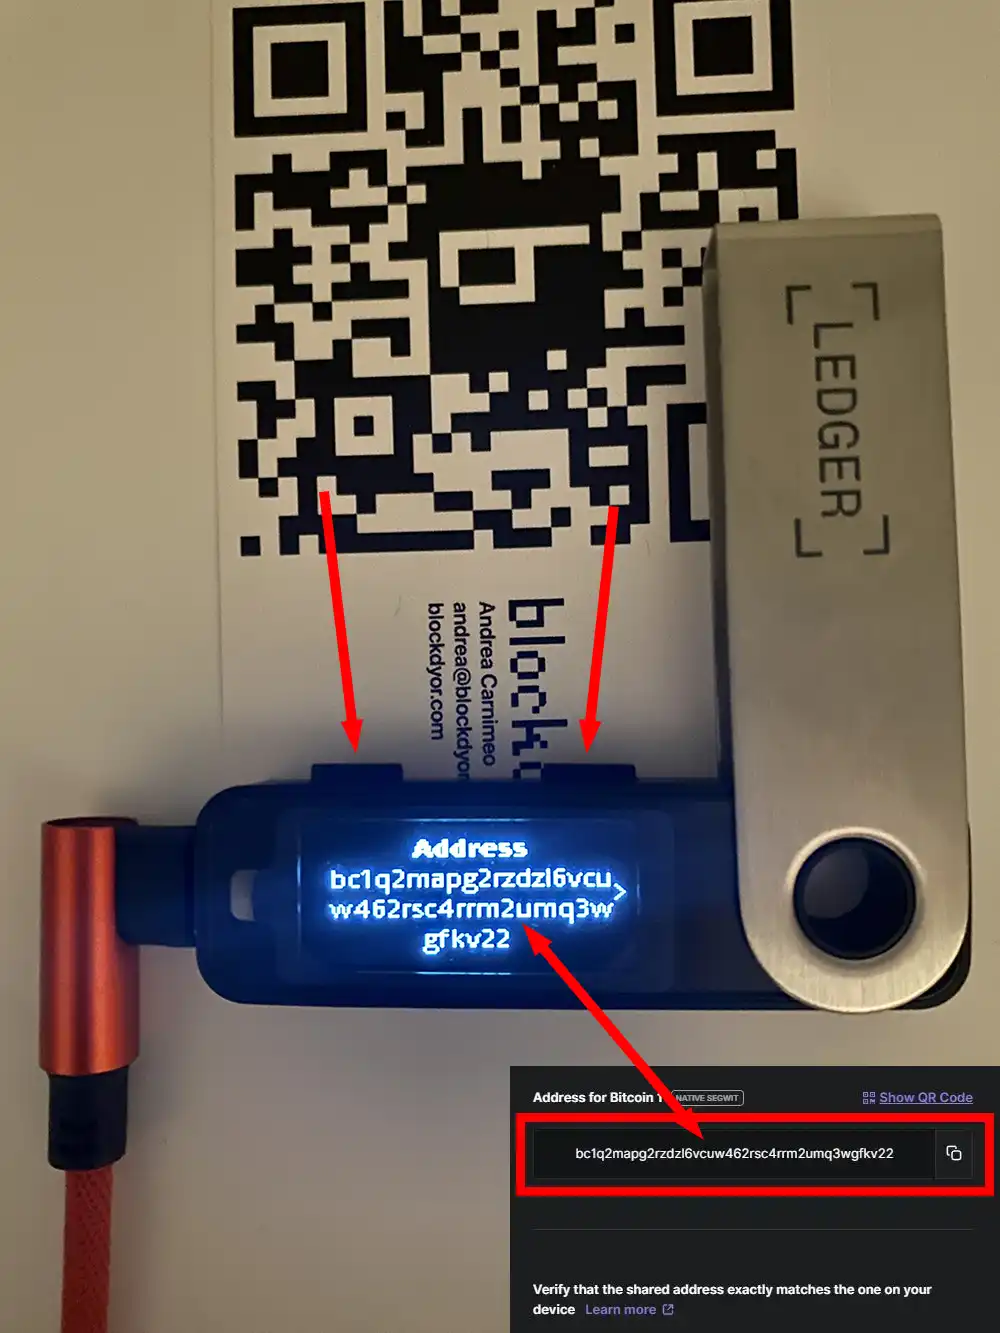 How to Send Receive Funds With The Ledger Nano S Plus Step 8a